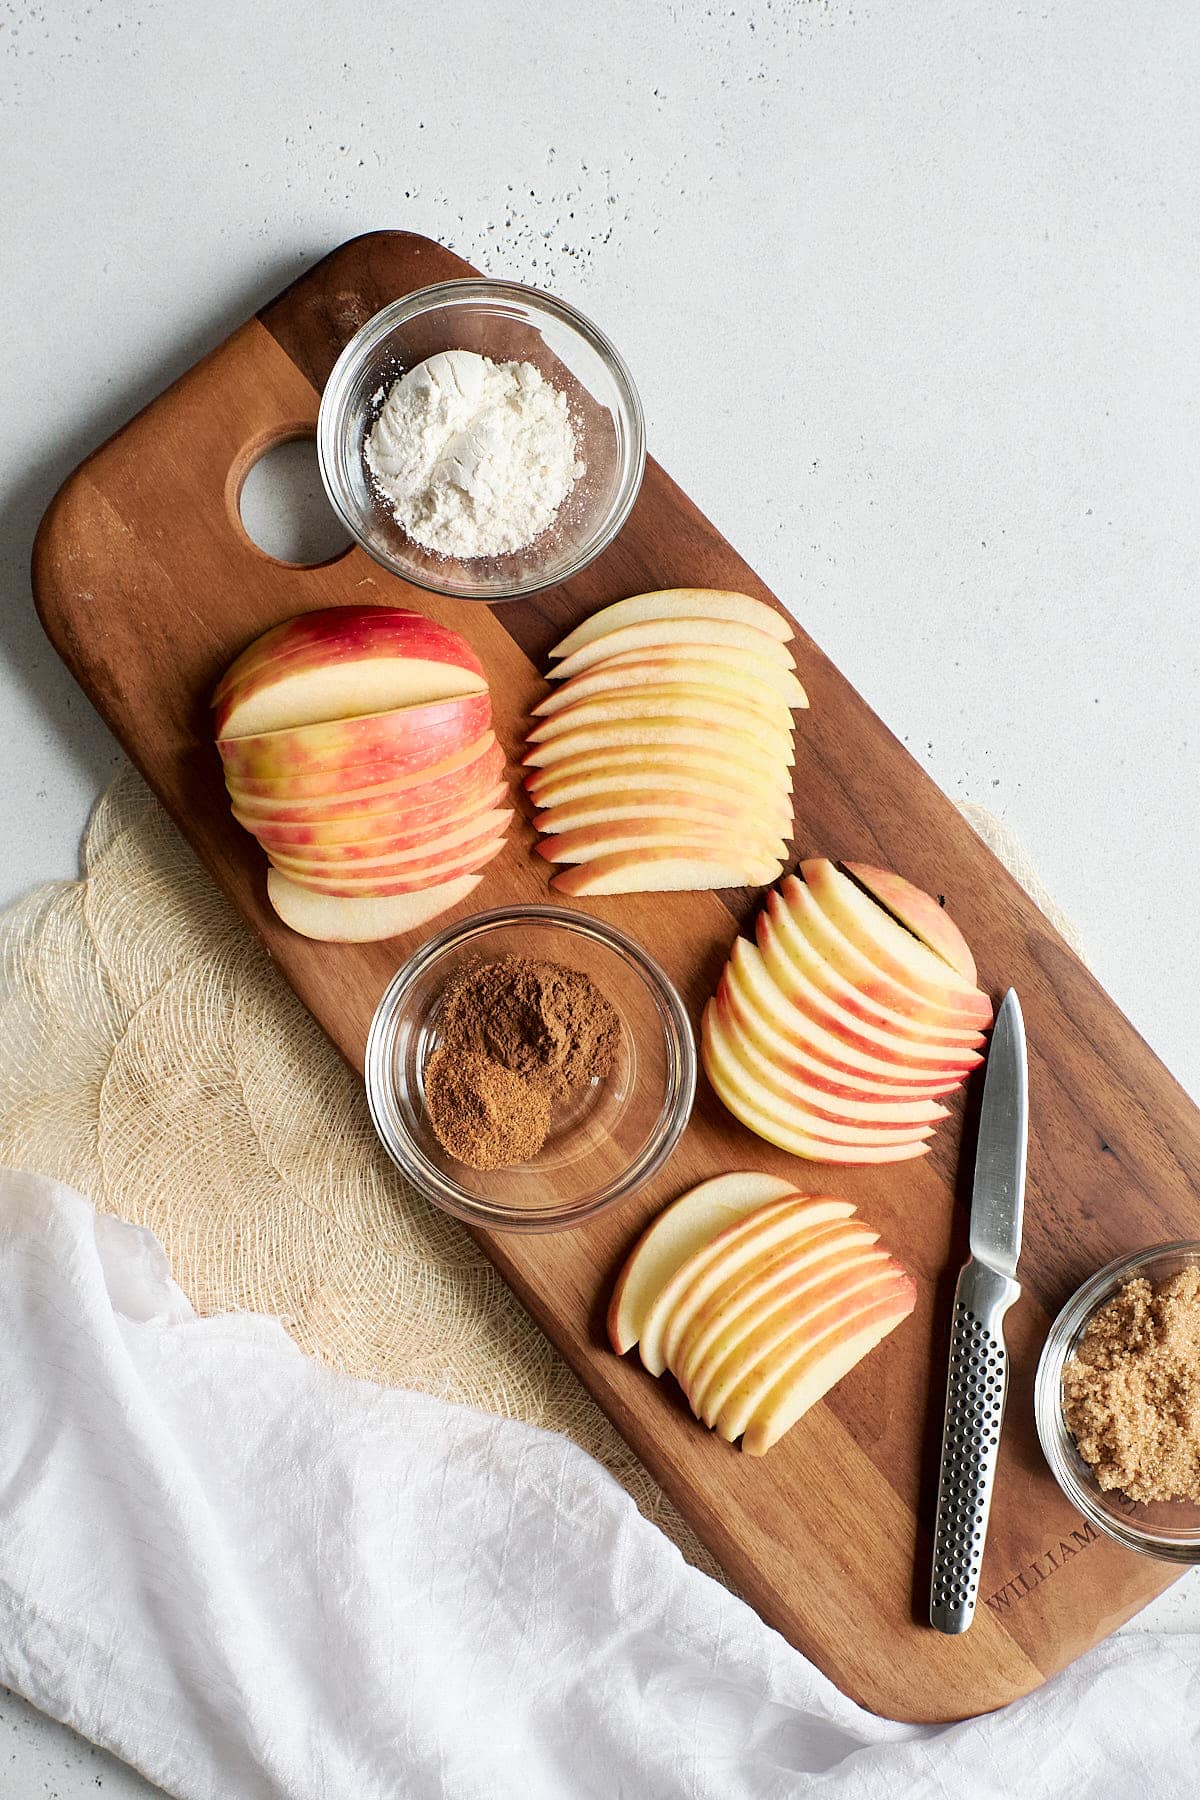 Sliced apples and filling ingredients on a brown cutting board